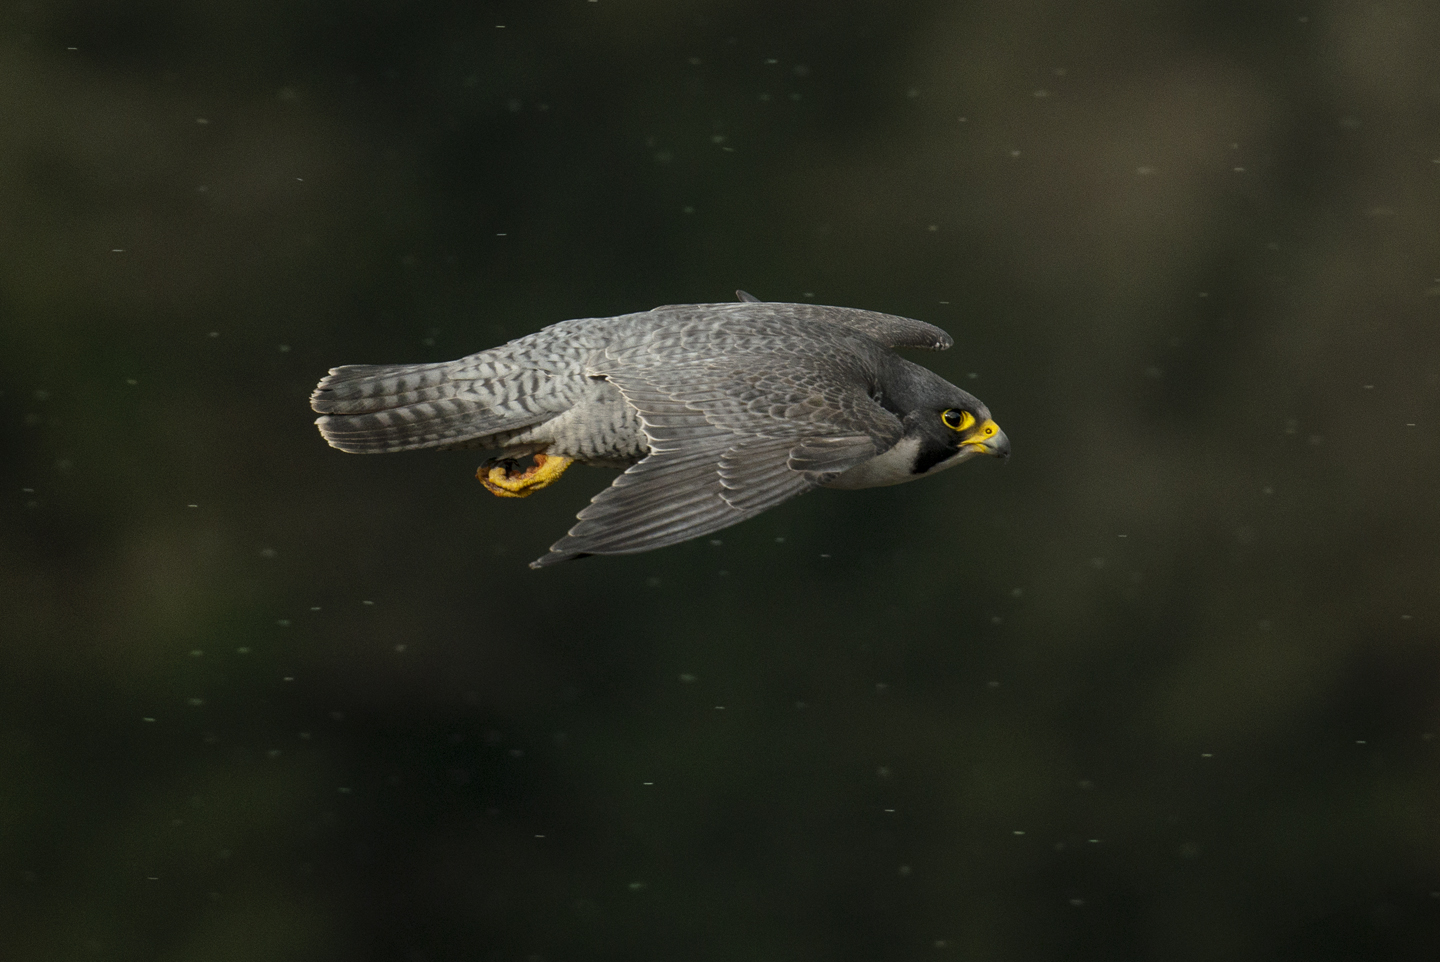  The peregrine, or "wandering" falcon is no longer a nomad, preferring to hold its territory year round, come rain or shine 